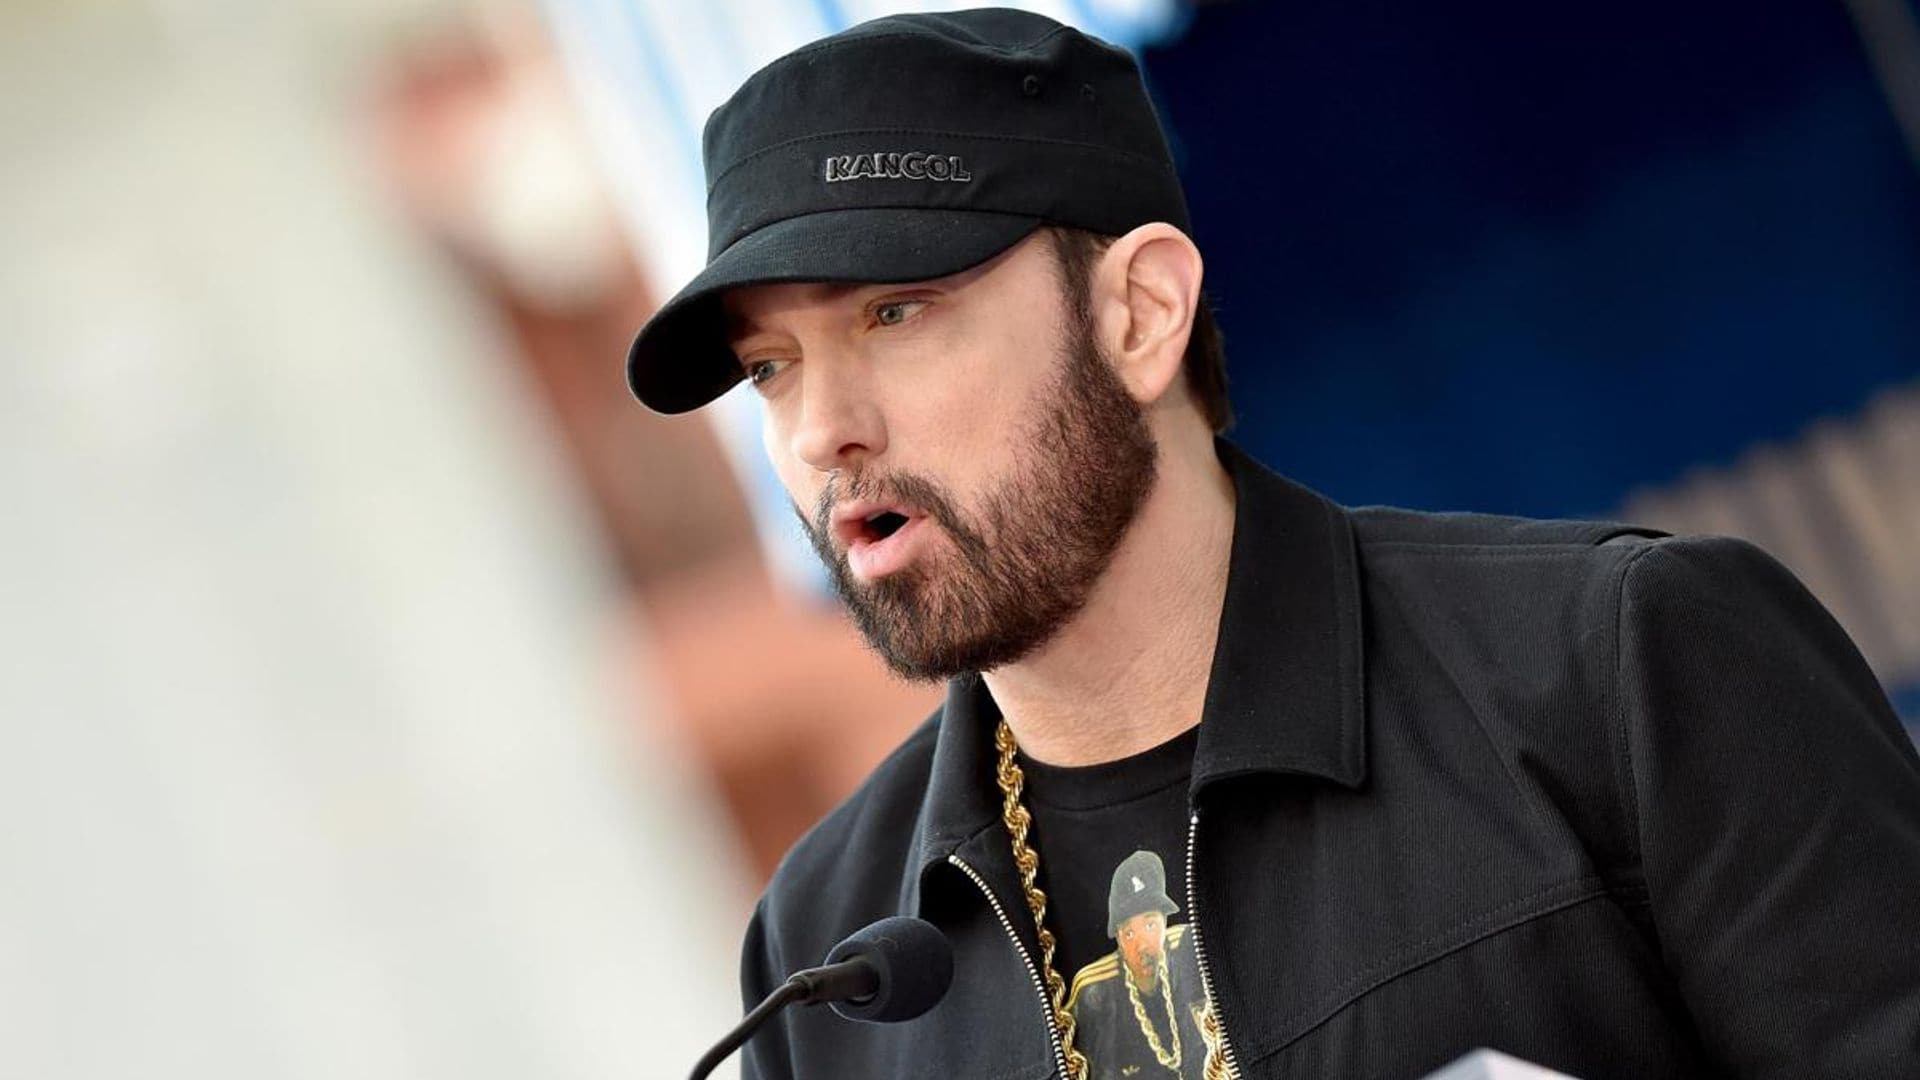 New Music Friday: the biggest releases from Tainy, Eminem, Paul McCartney & more